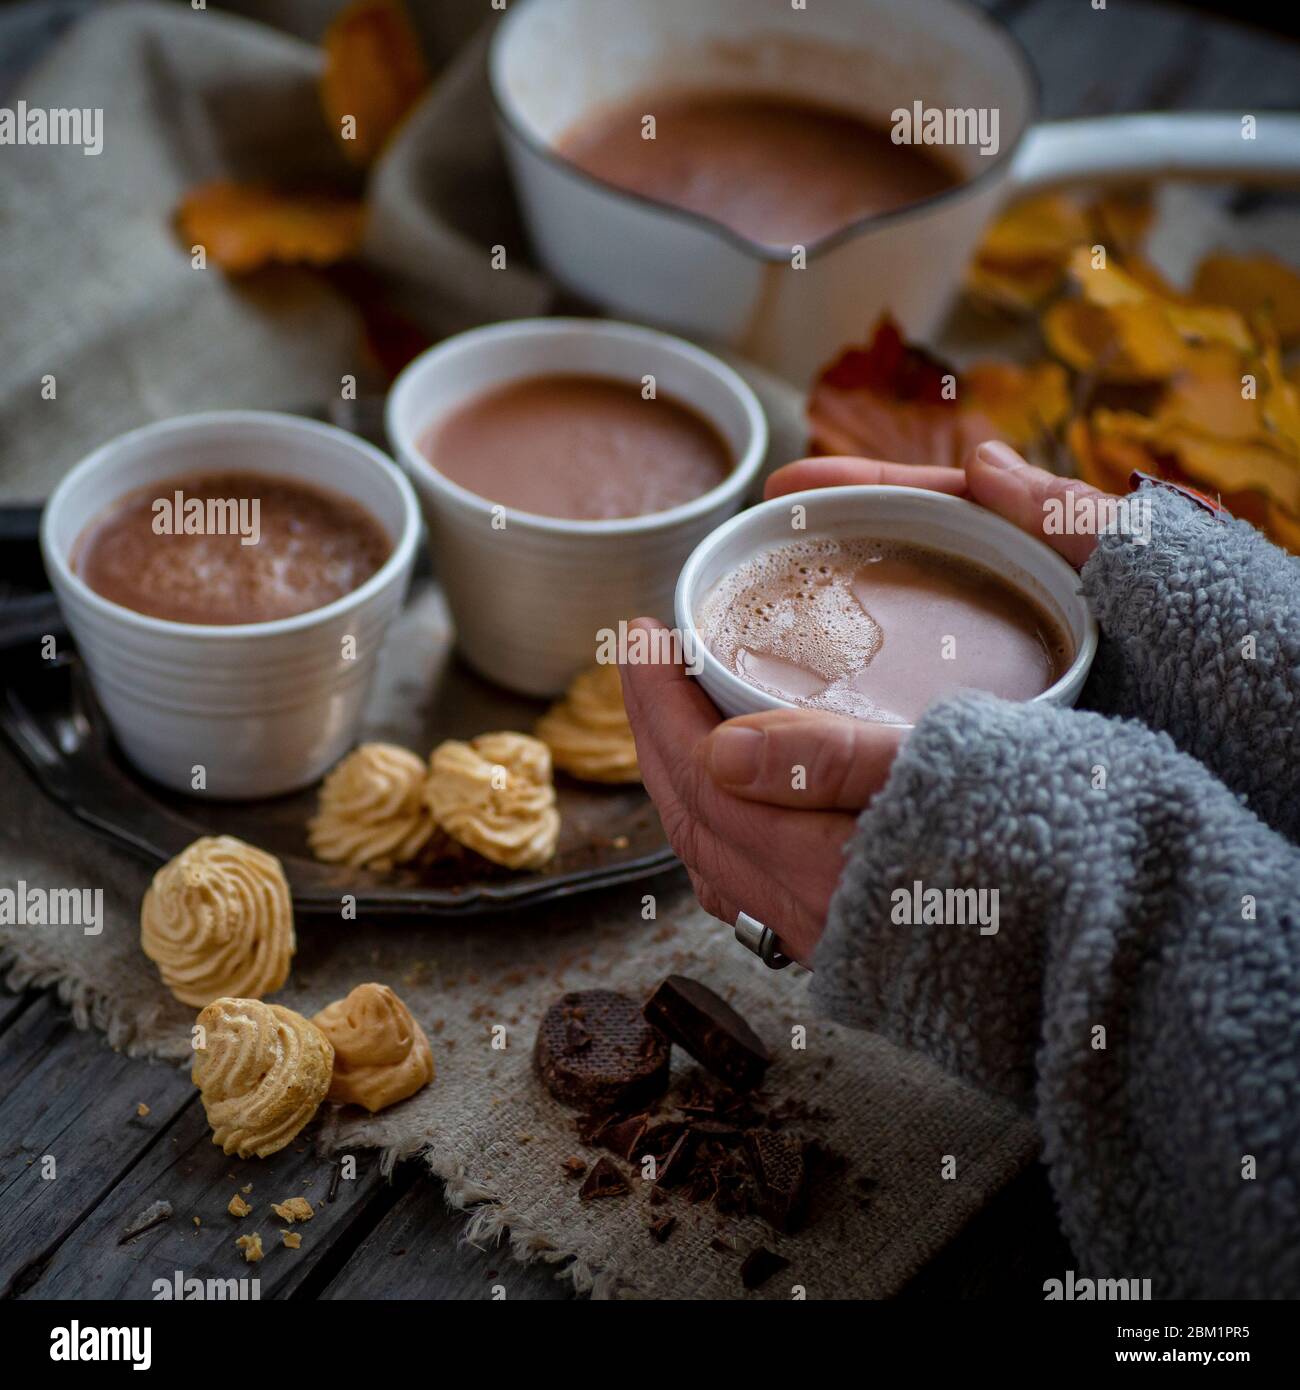 Tasty setup with cups and hot chocolate and autumn colors. Female hands holding one of the cups. Stock Photo